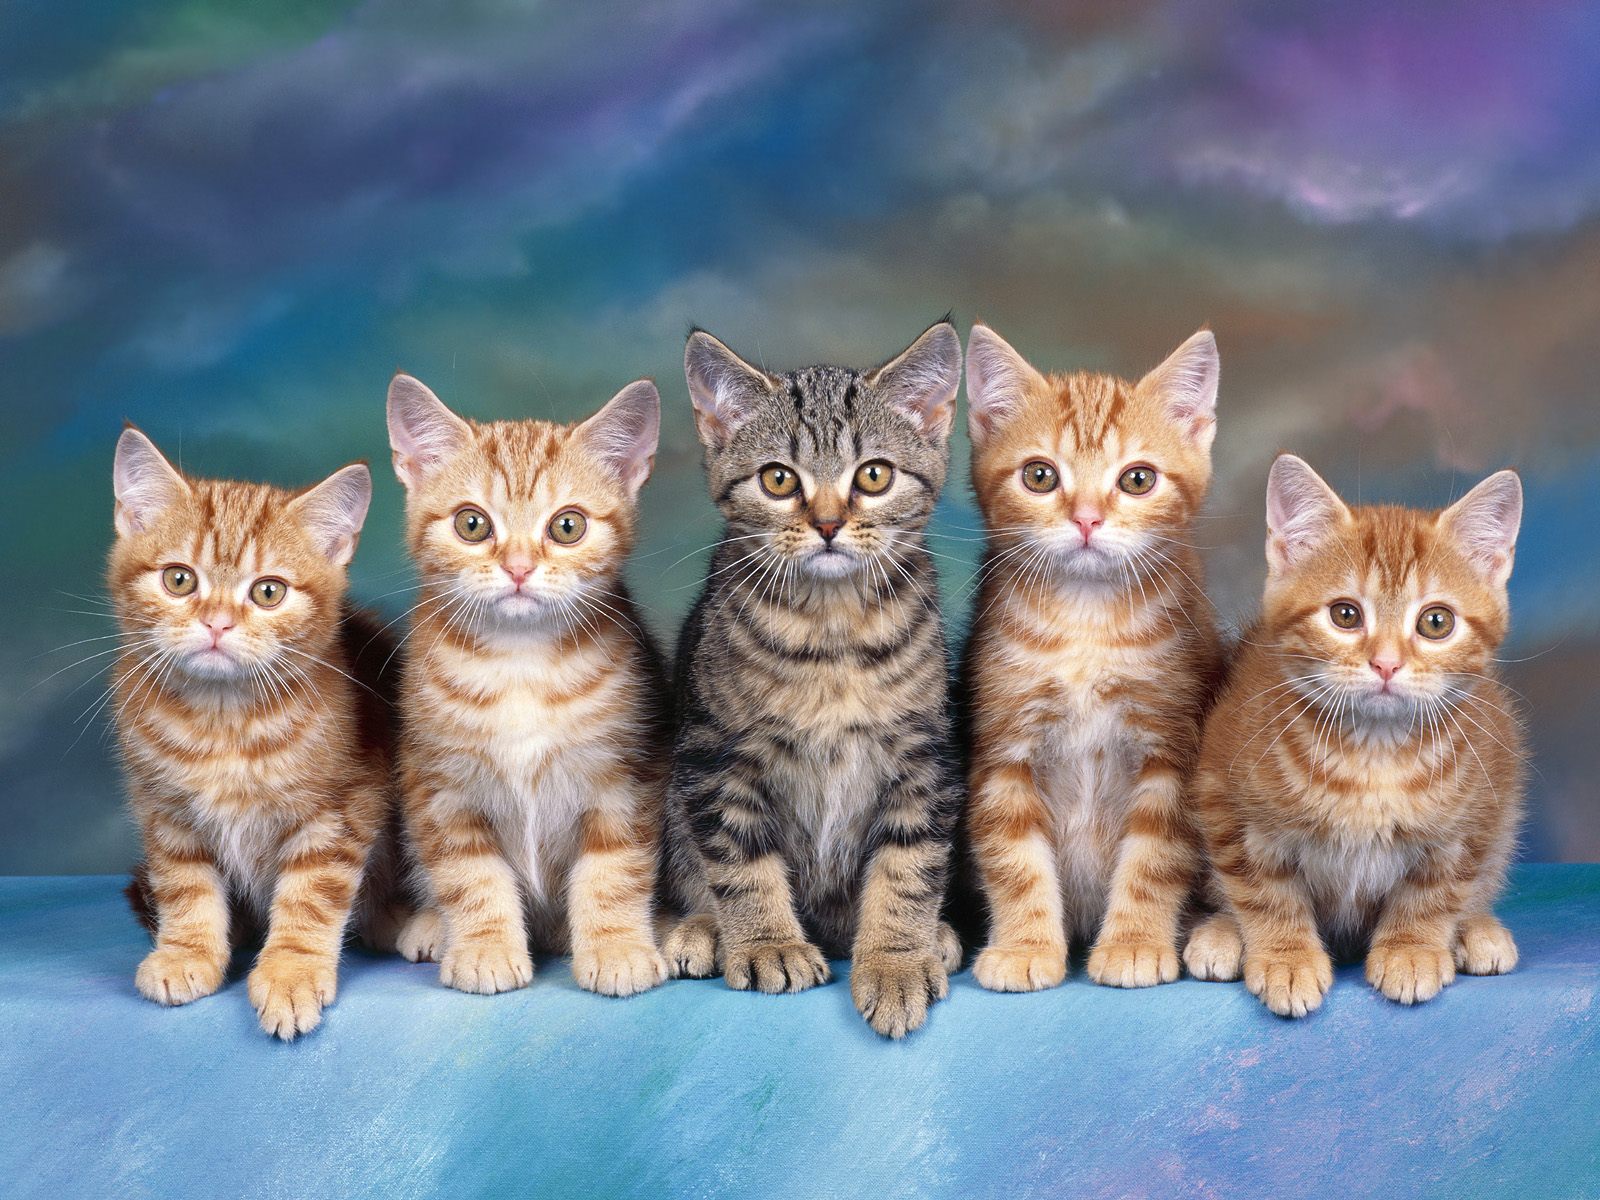 Free download Tabby Kittens Animals Wallpaper Image with Cats [1600x1200] for your Desktop, Mobile & Tablet. Explore Free Kitten Wallpaper. Free Cat Wallpaper For Desktop, Cat Picture for Wallpaper